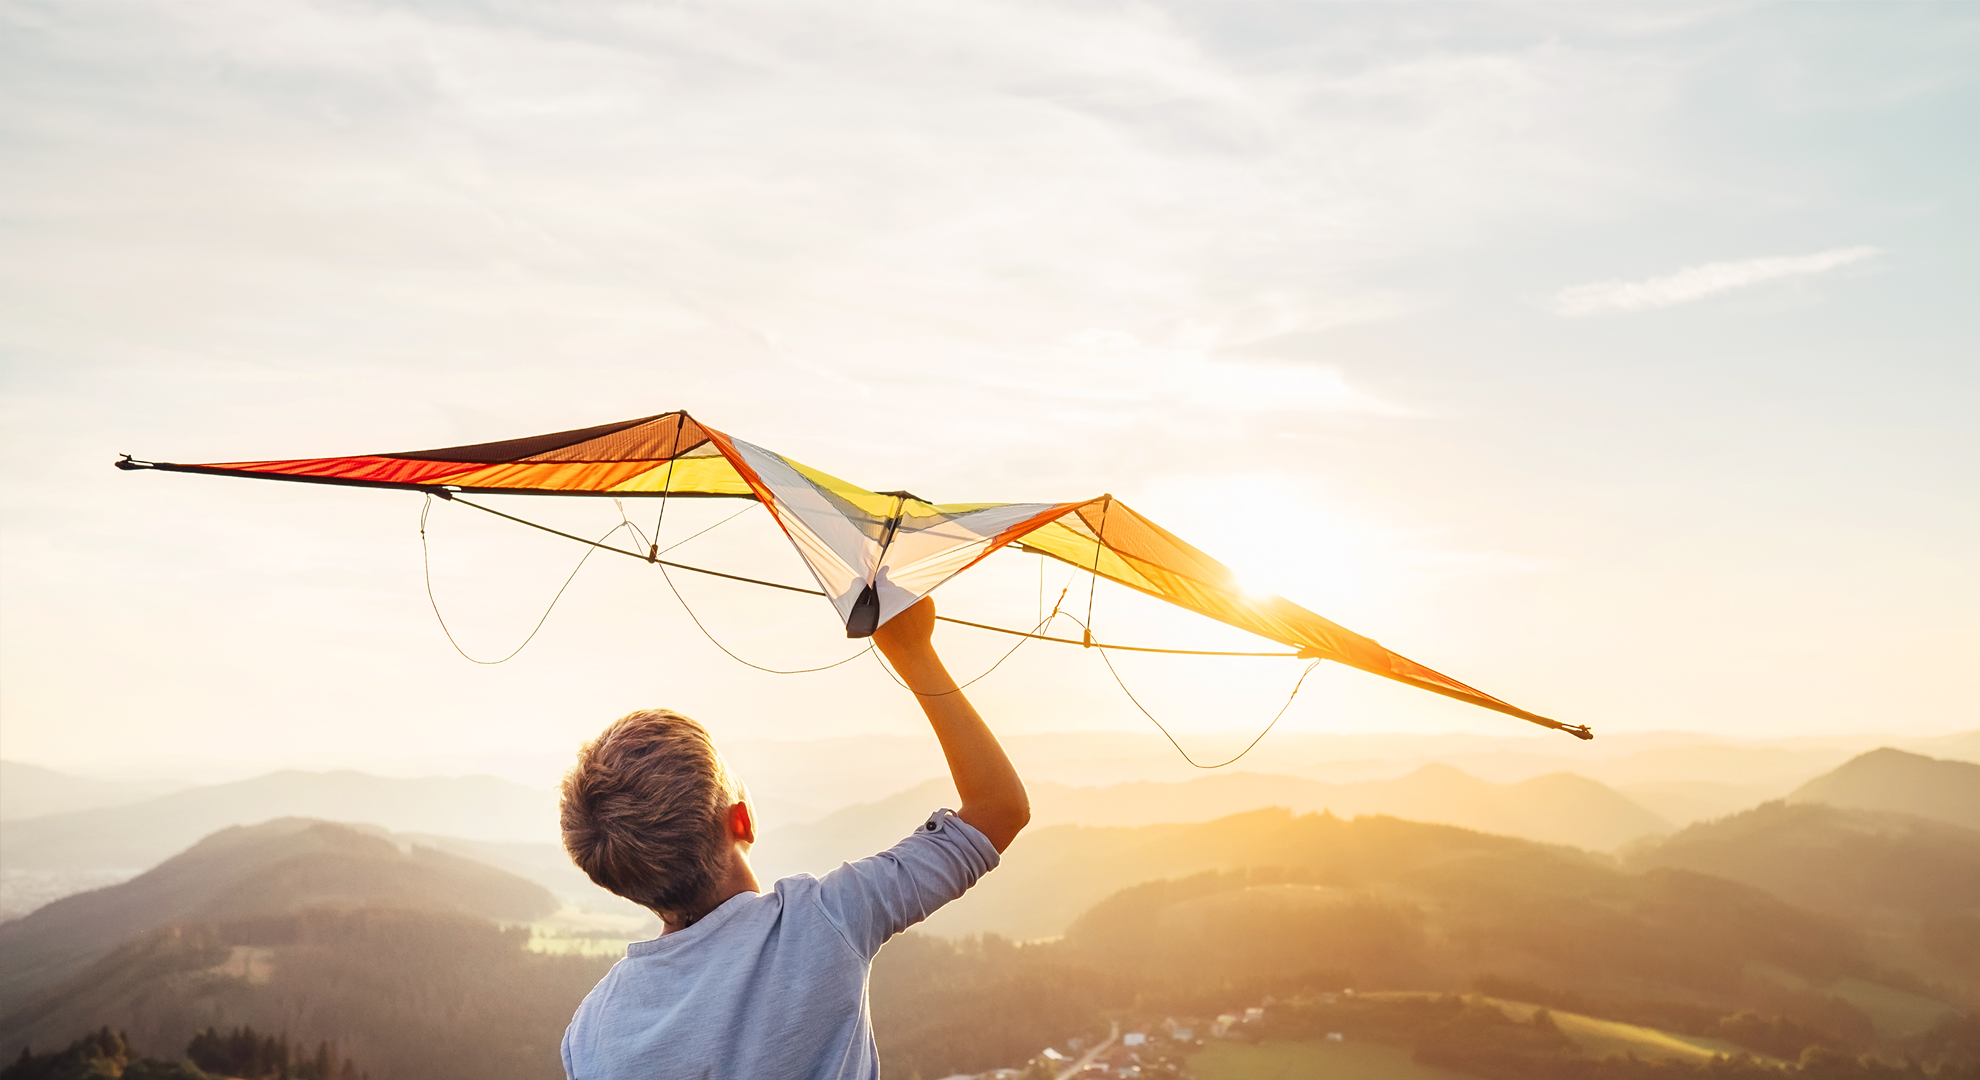 A person at the top of a hill, holding a kite and looking towards the sunset